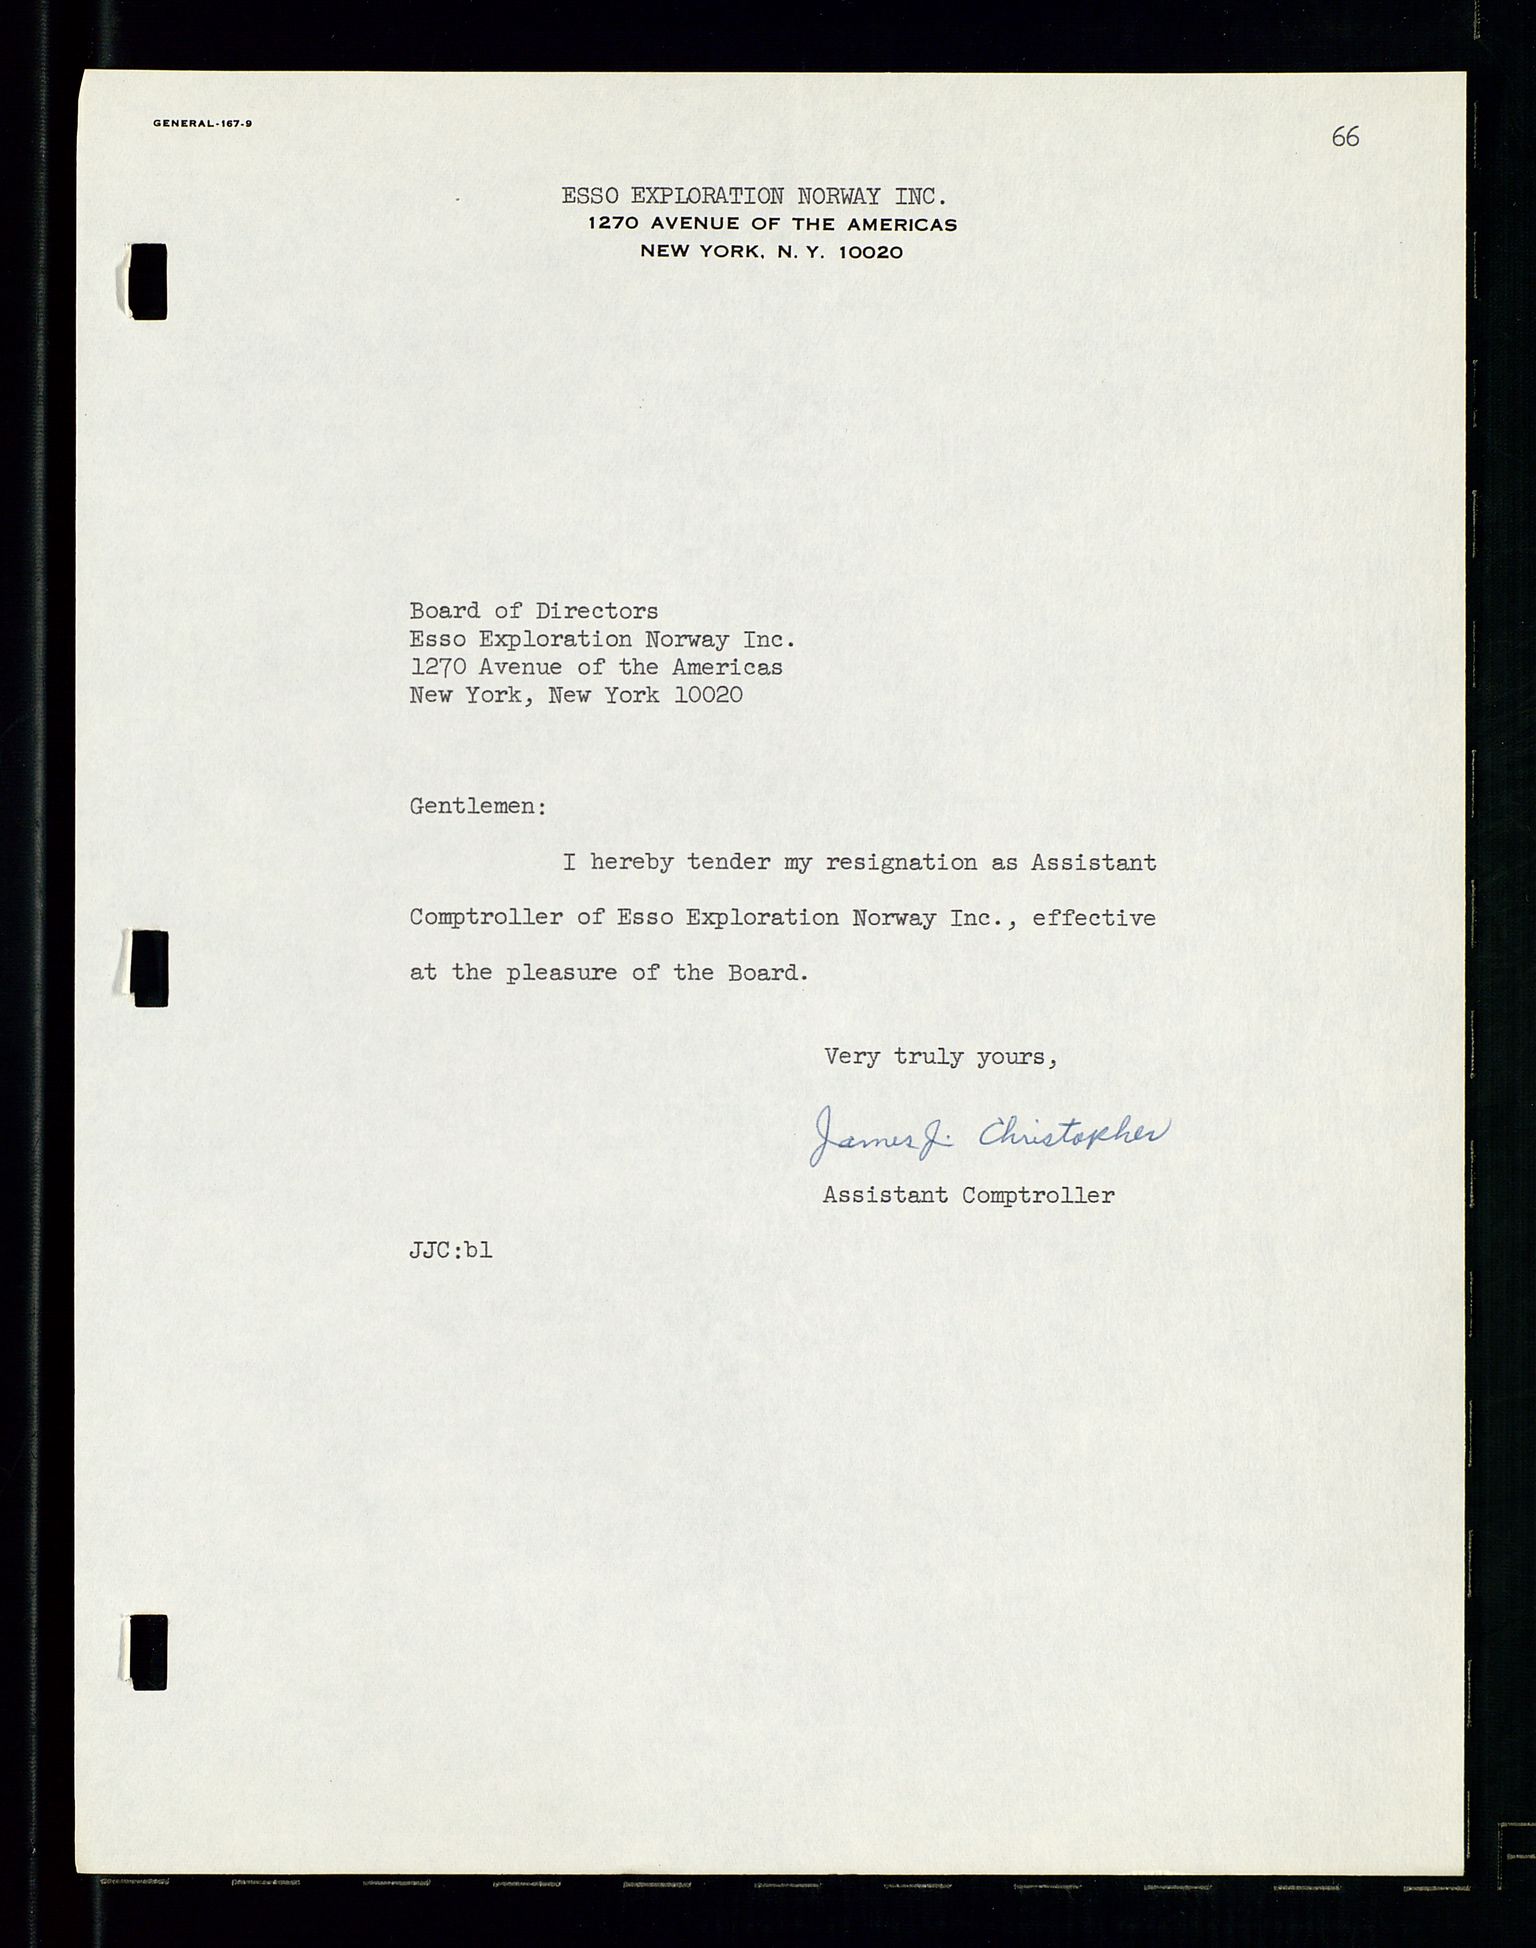 Pa 1512 - Esso Exploration and Production Norway Inc., SAST/A-101917/A/Aa/L0001/0001: Styredokumenter / Corporate records, By-Laws, Board meeting minutes, Incorporations, 1965-1975, s. 66